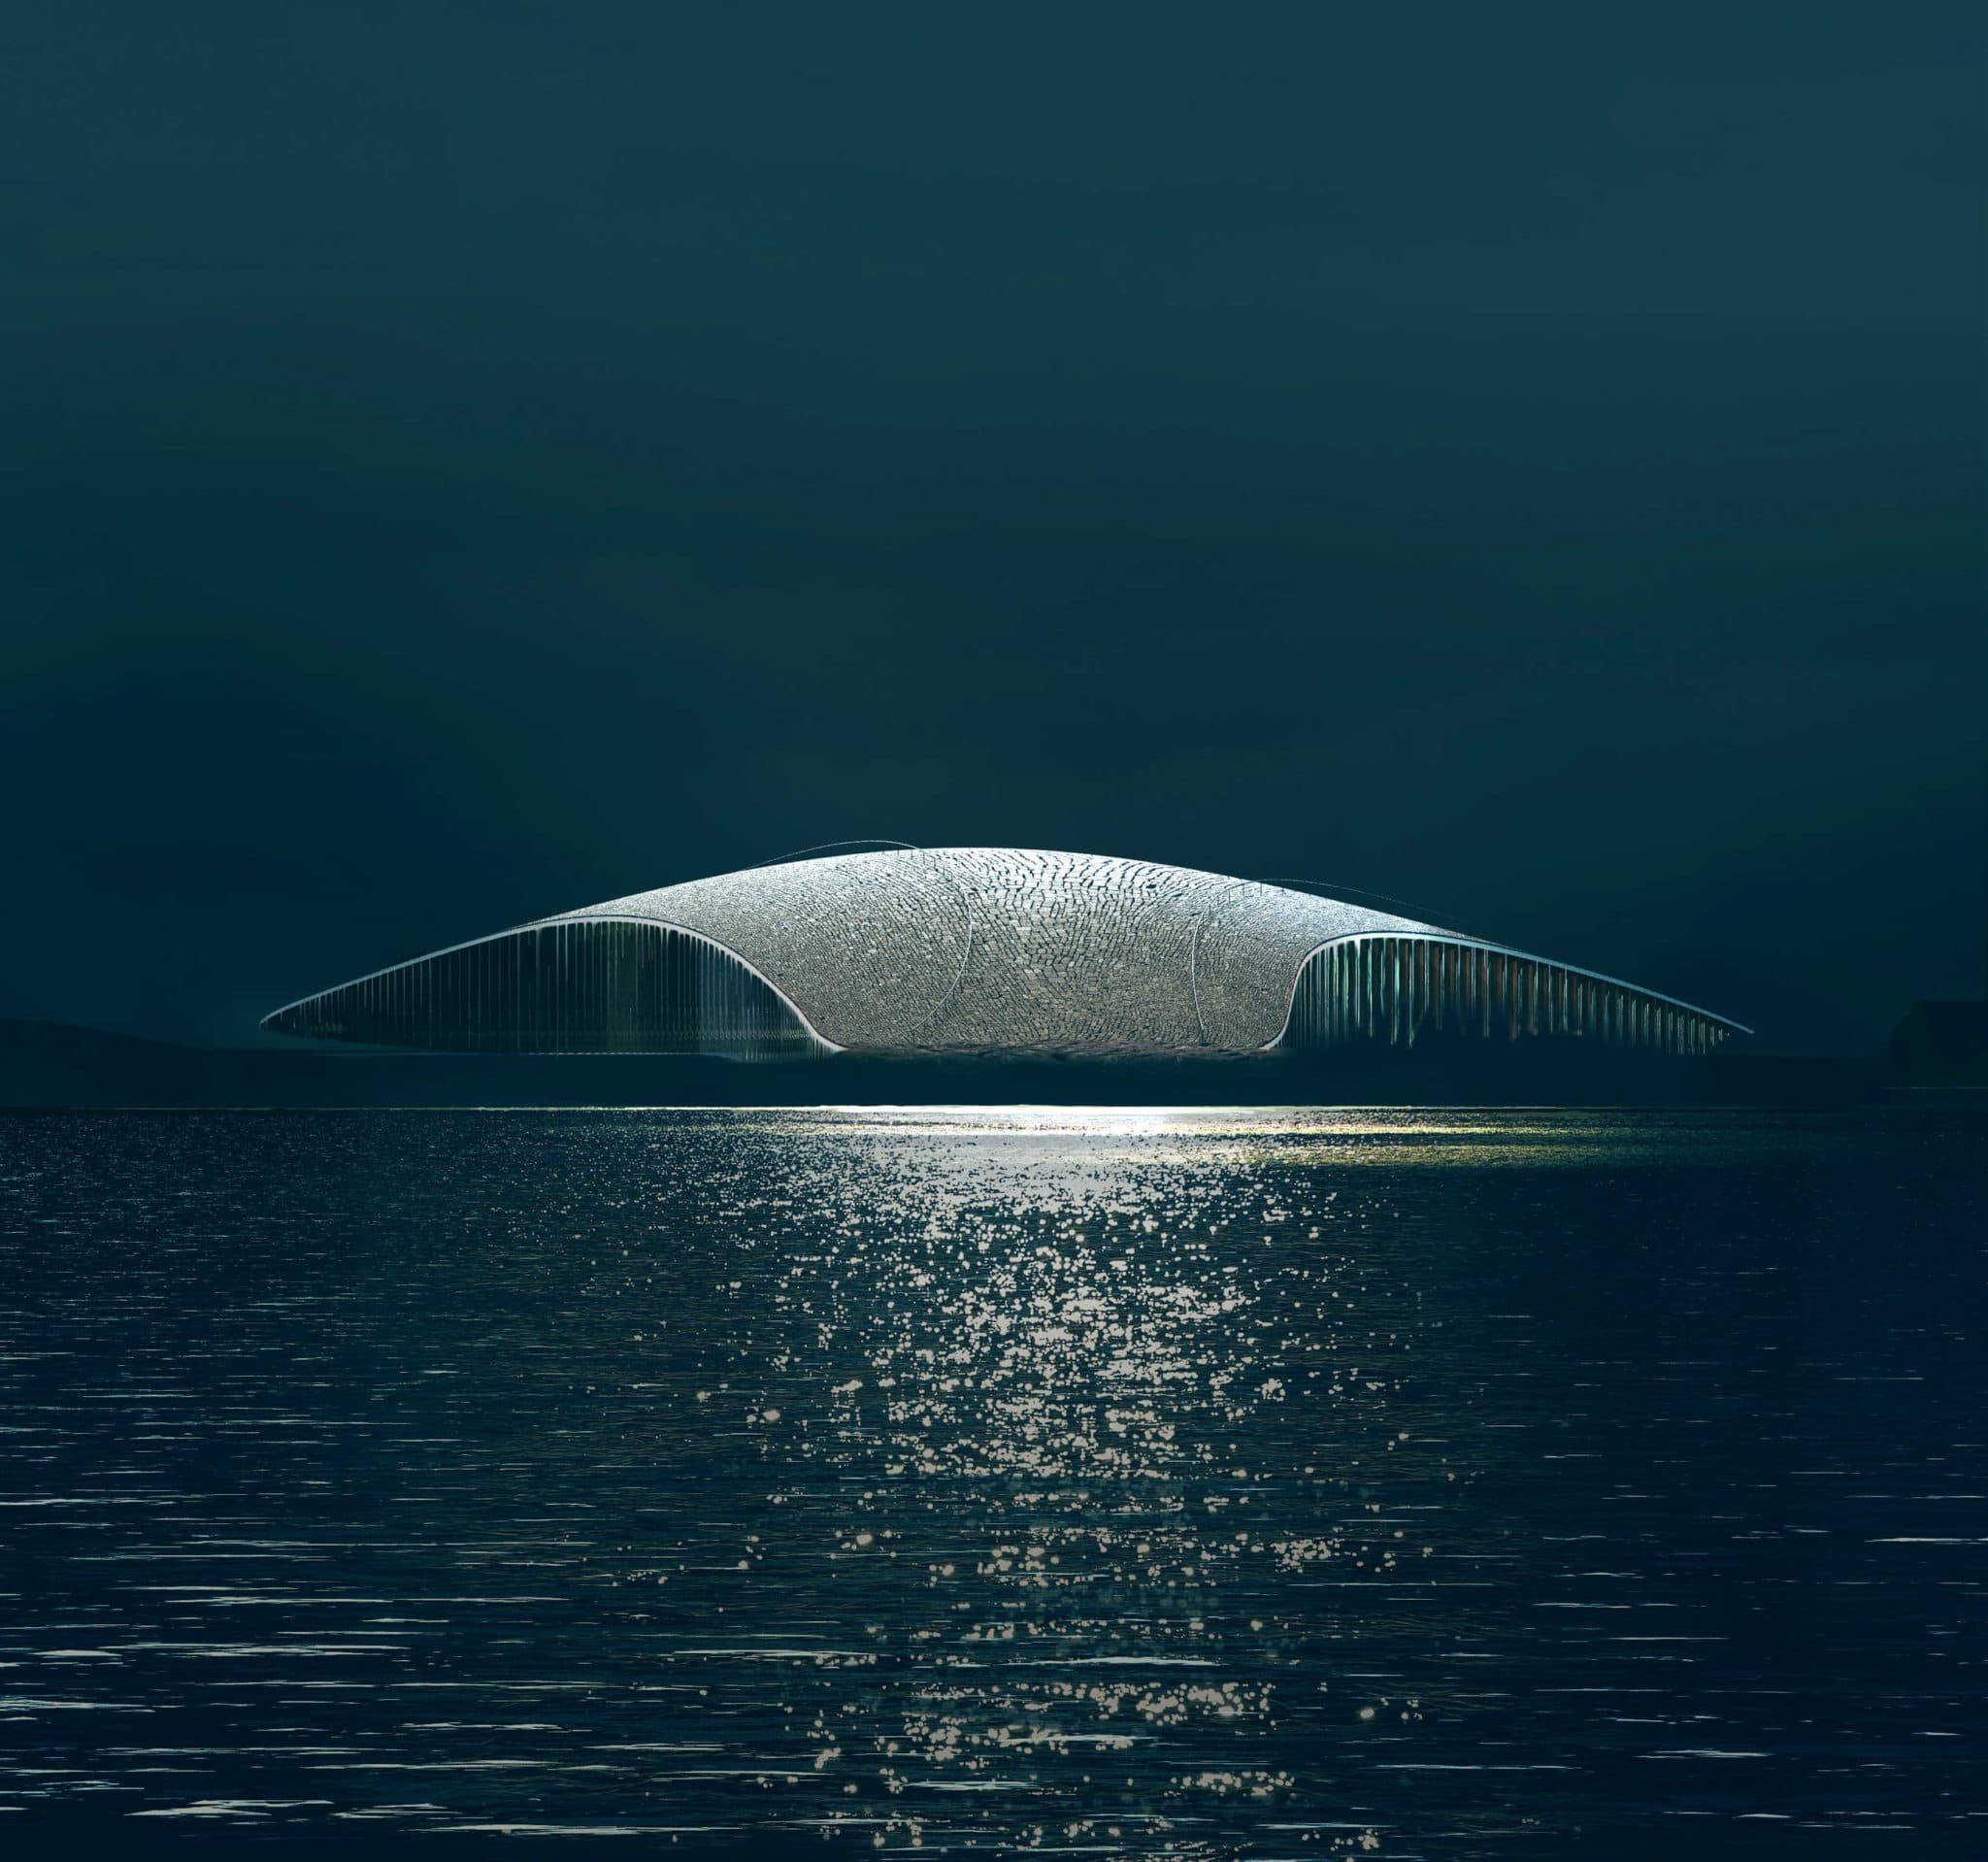 One Day, a Project : The Whale by Dorte Mandrup